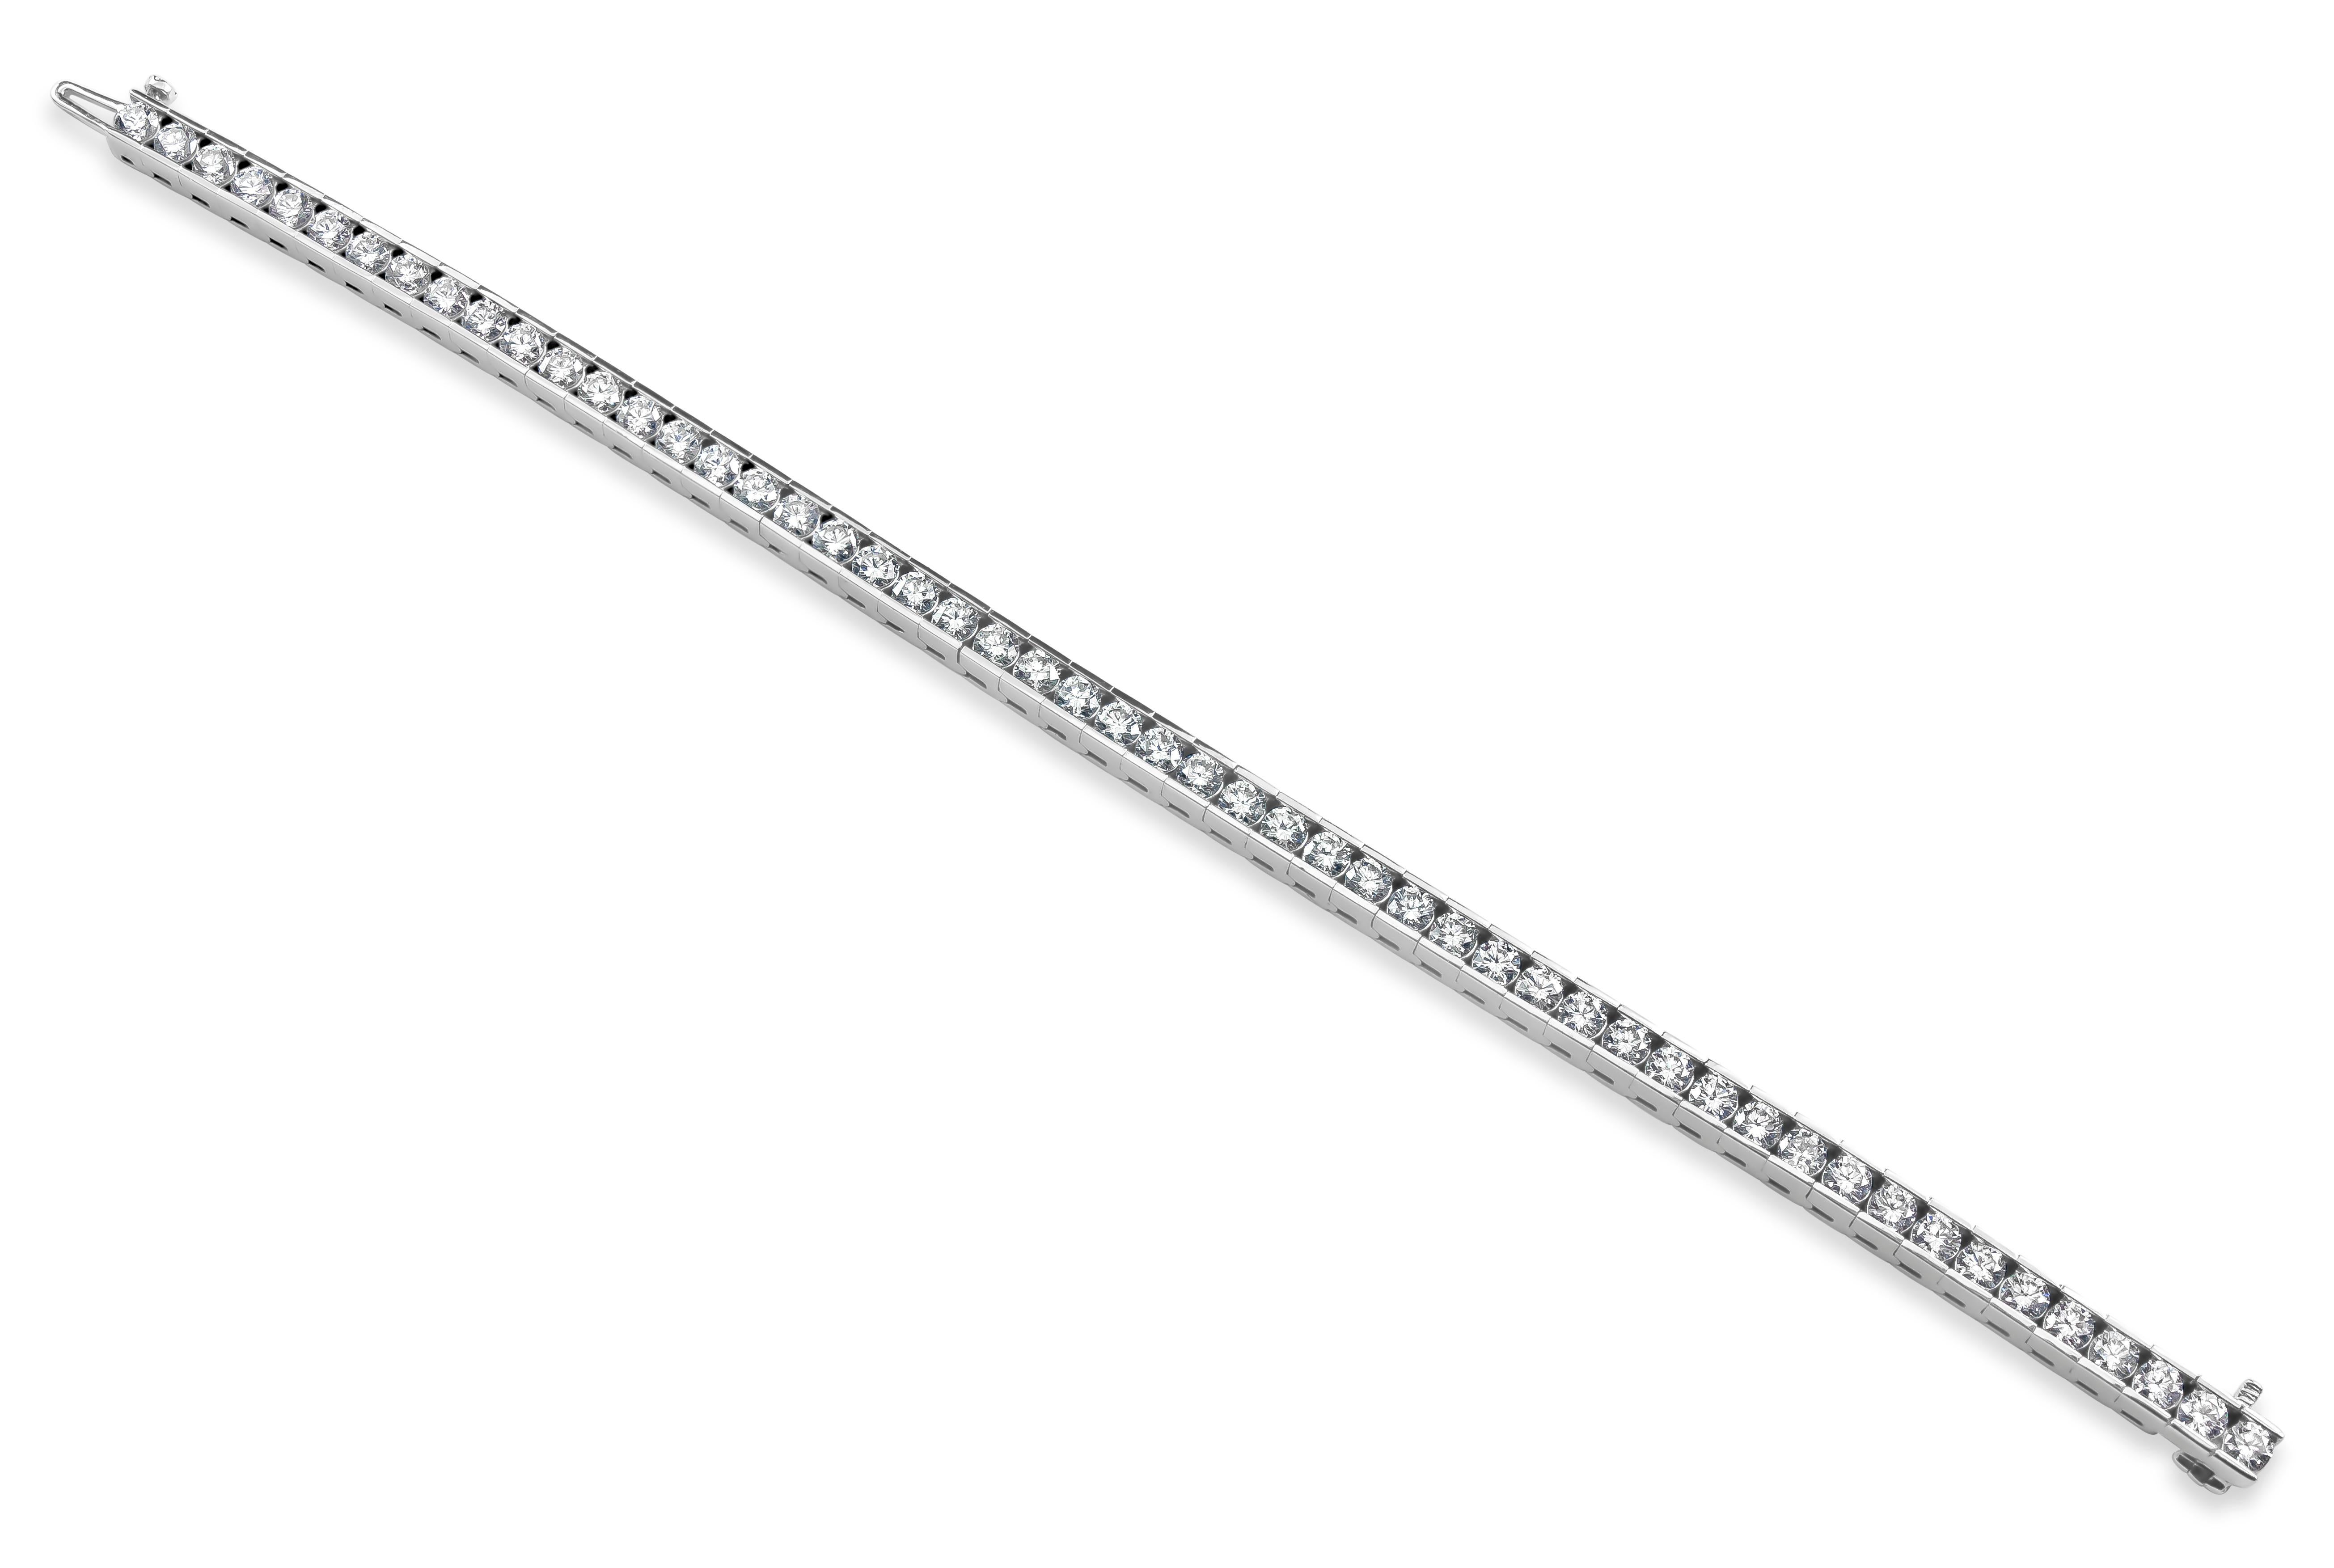 A modern tennis bracelet design showcasing 6.82 carats of round brilliant diamonds, set in a 14 karat white gold channel. 

Style available in different price ranges. Prices are based on your selection of the 4C’s (Carat, Color, Clarity, Cut).